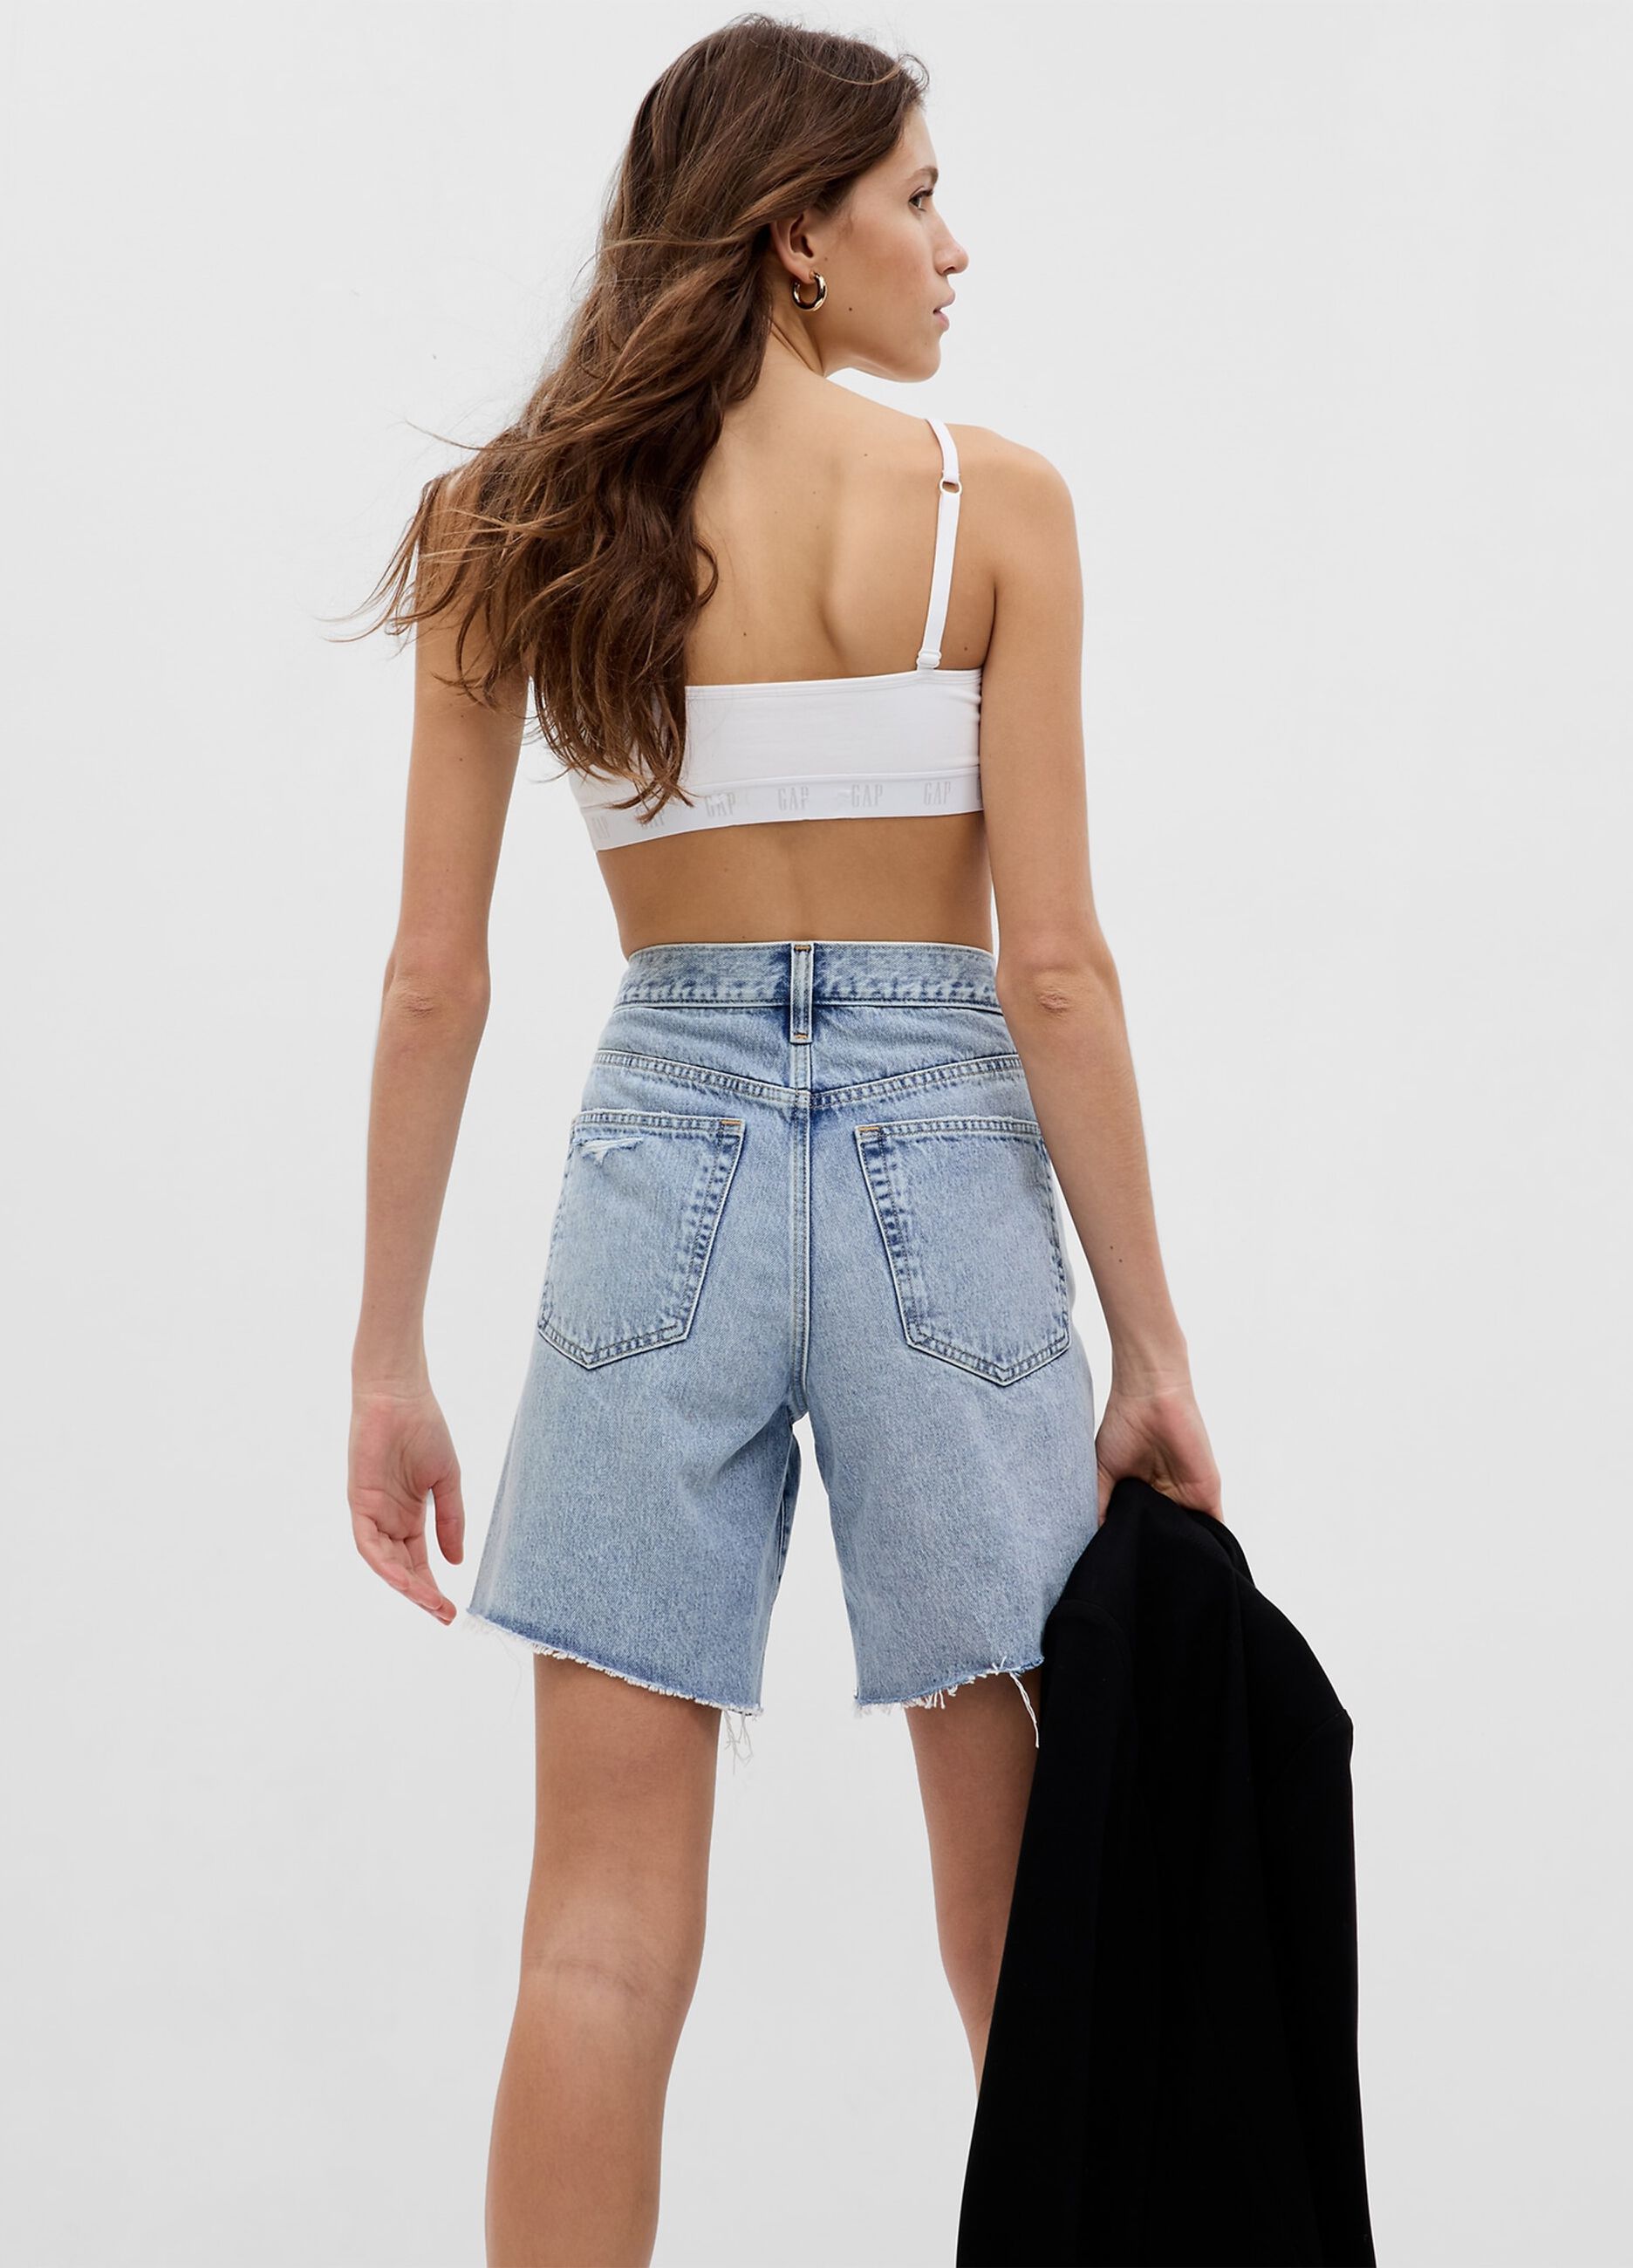 Loose-fit Bermuda shorts in denim shorts with abrasions